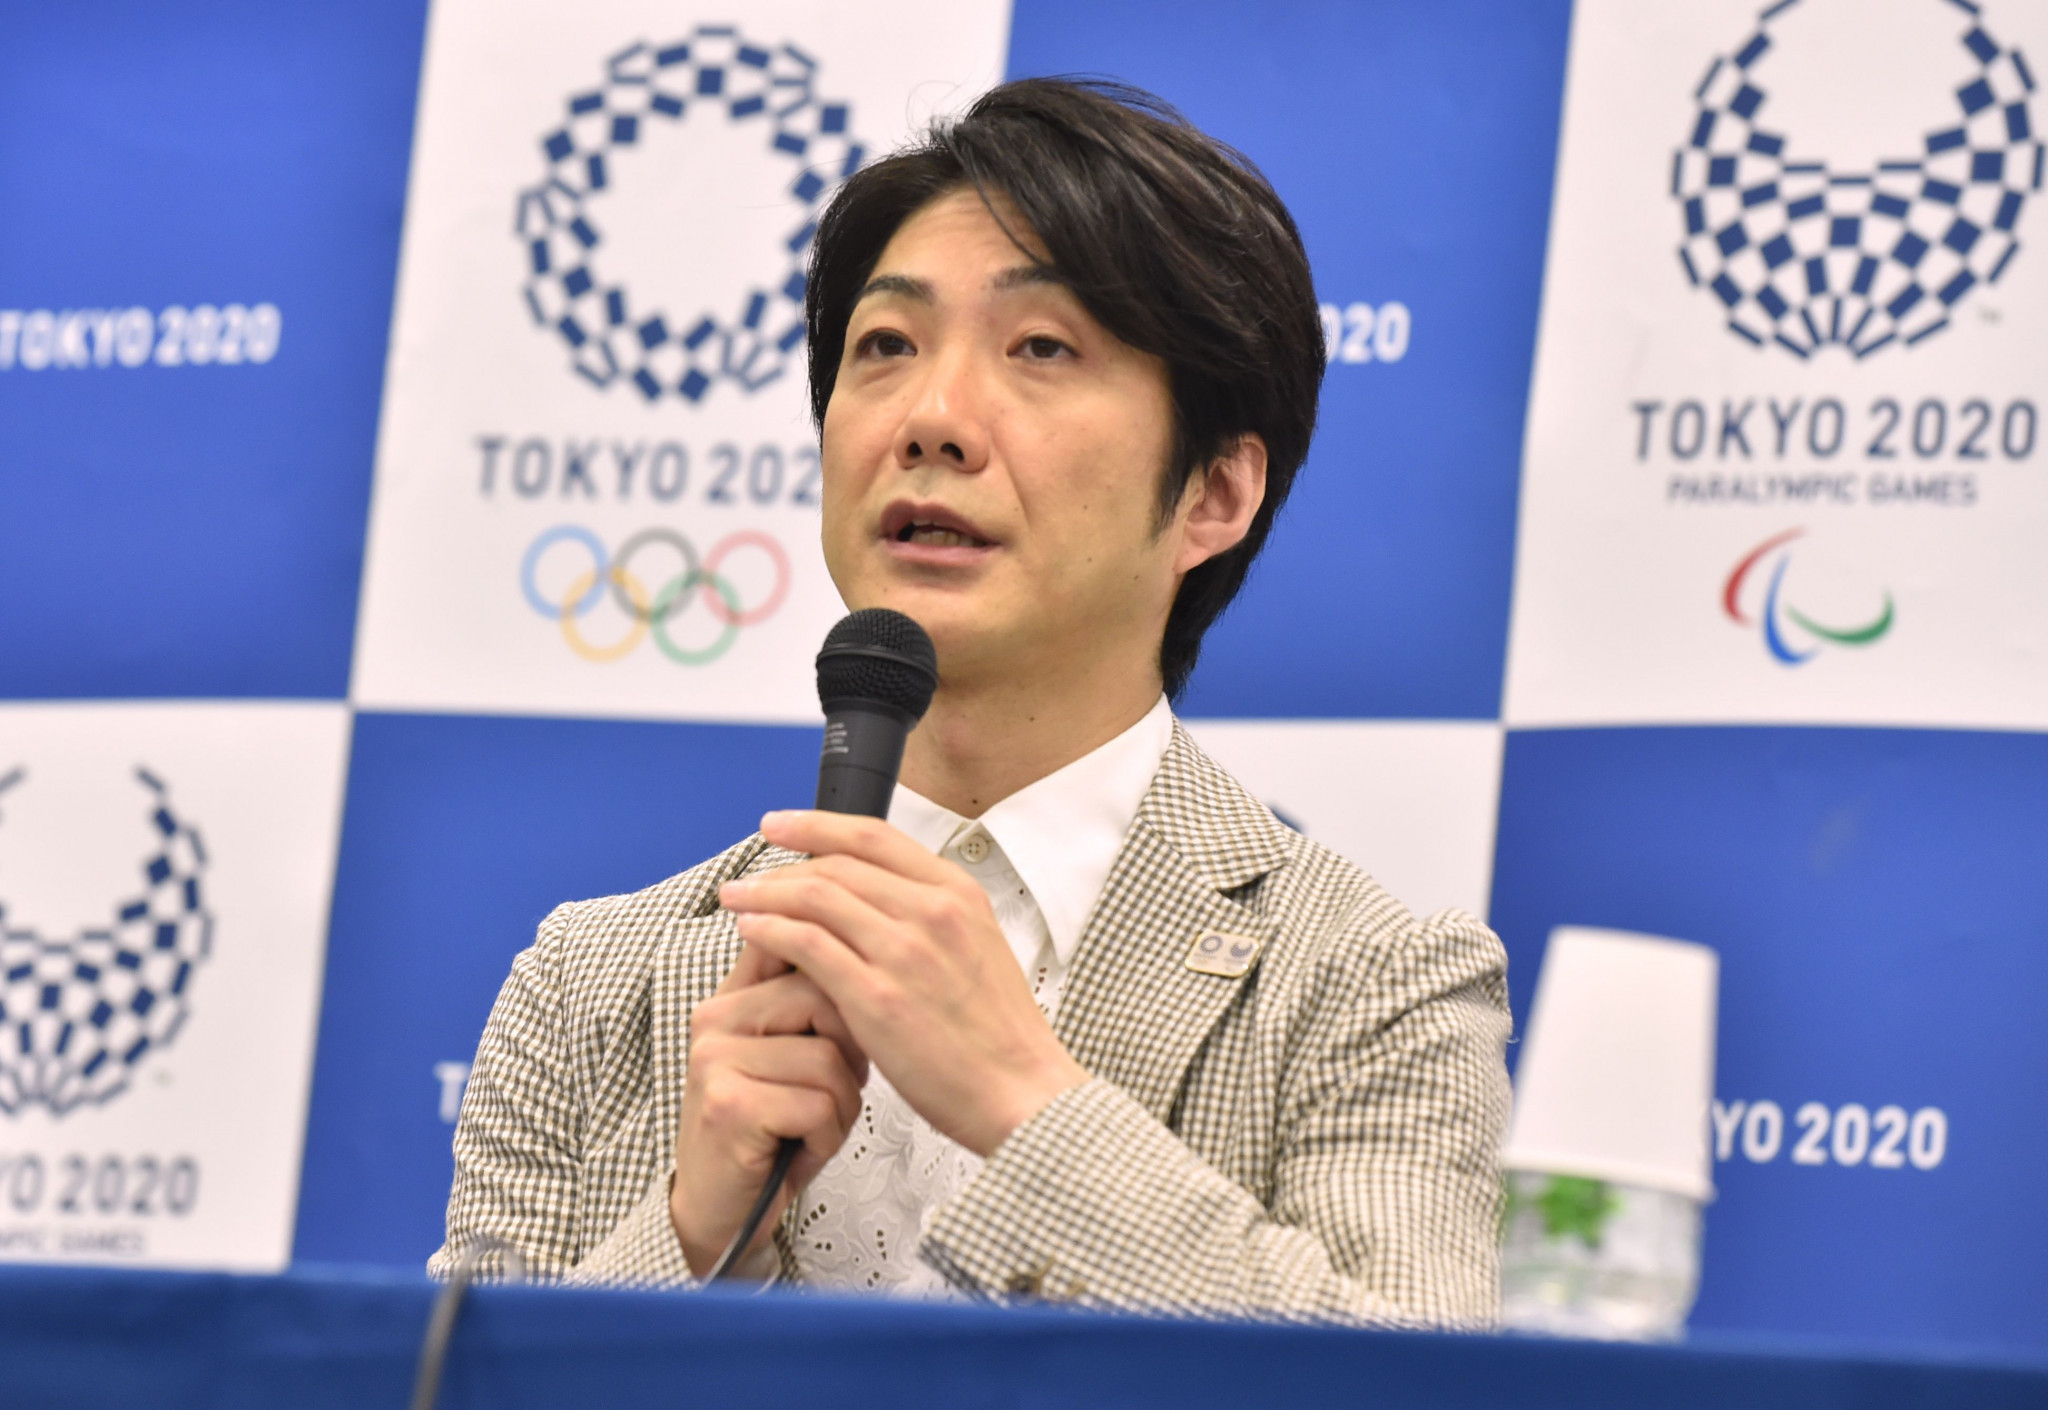 Tokyo 2020 Olympic Opening Ceremony "nearly 80 per cent complete", claims executive director